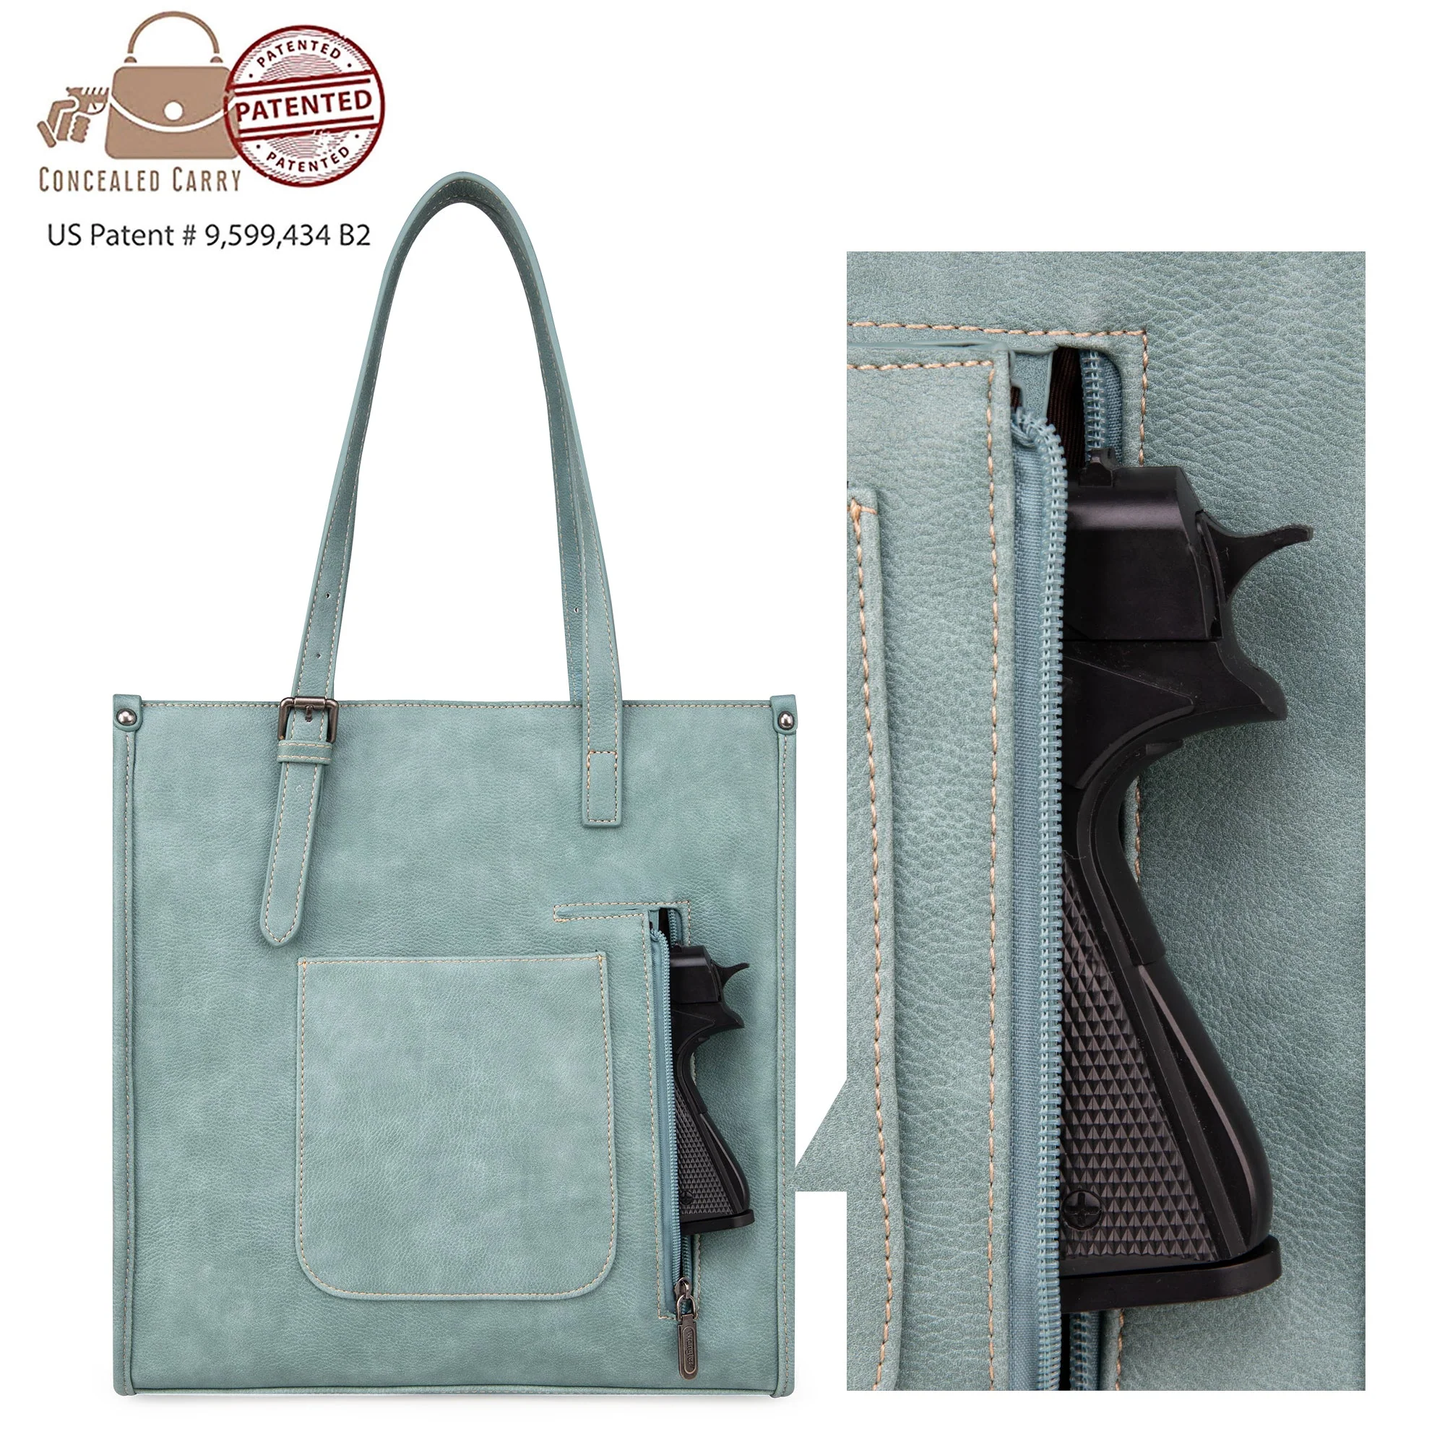 Wrangler Ladies Aztec Concealed Carry Turquoise Tote Bag WG52-G8317TQ